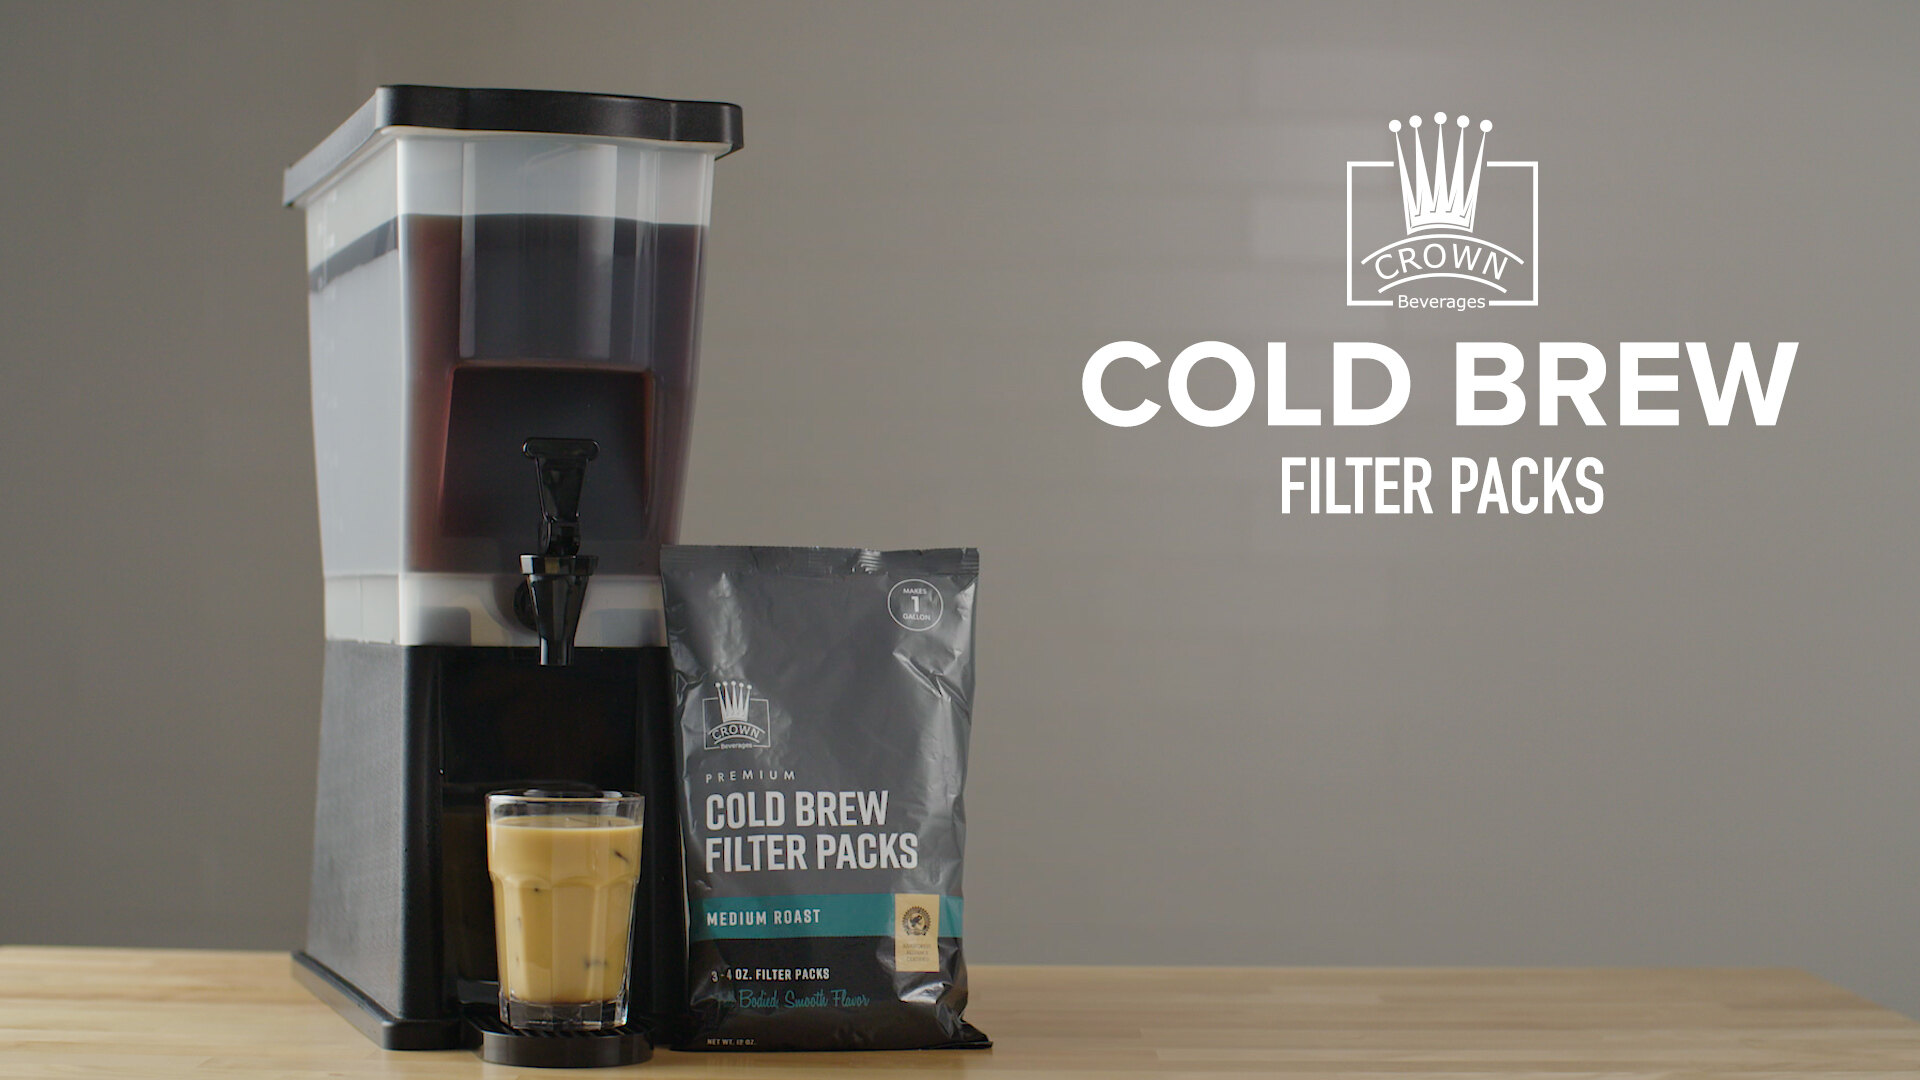 ROY G BIV COLD BREW FILTER PACKS - Stone Creek Coffee